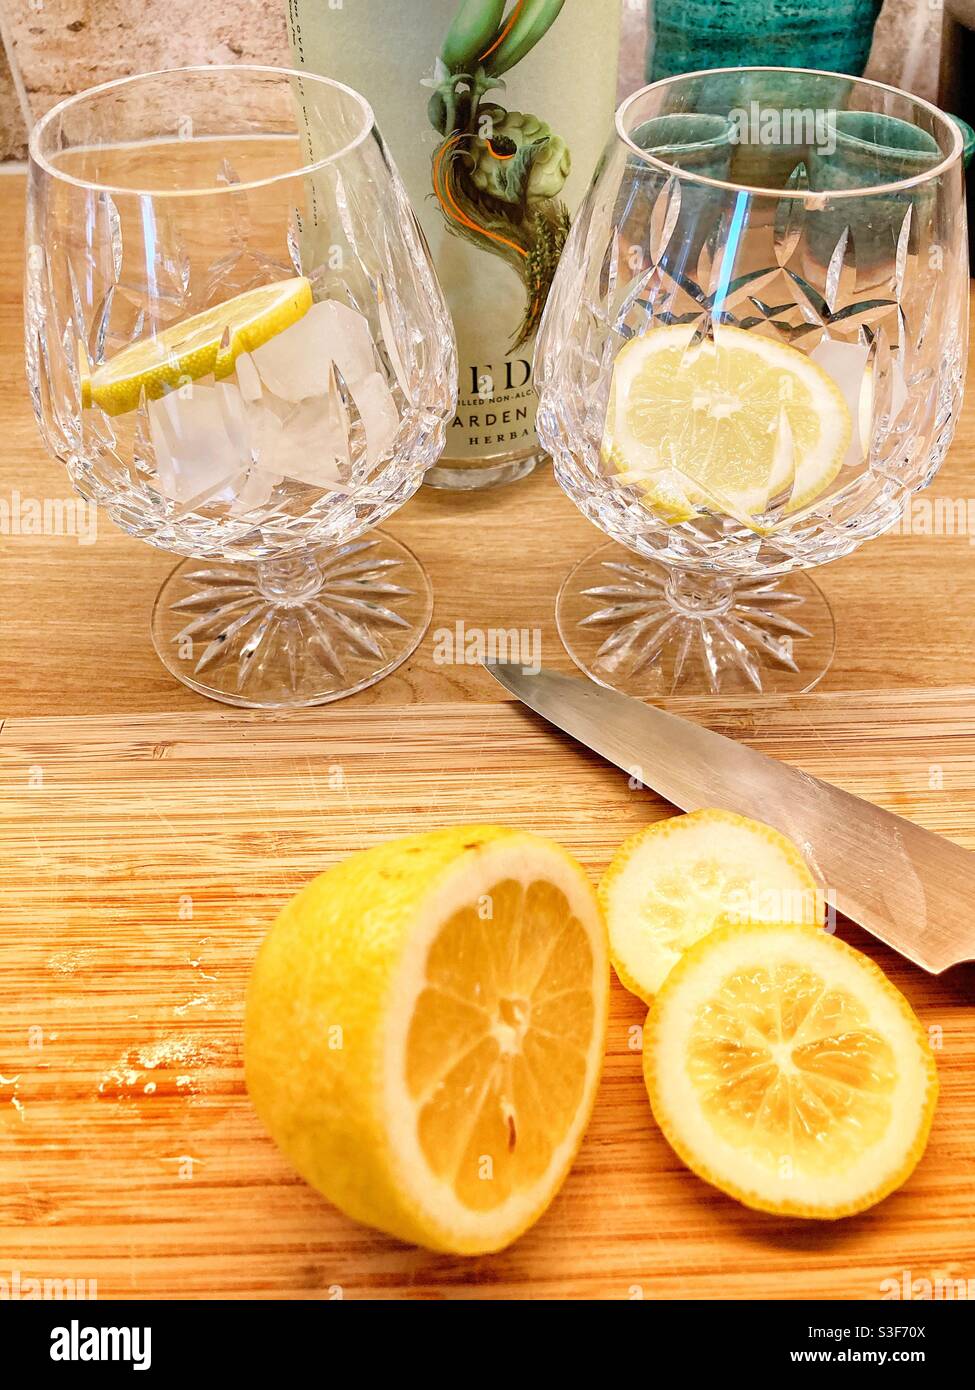 https://c8.alamy.com/comp/S3F70X/seedlip-non-alcoholic-distilled-spirit-with-tonic-chopping-lemon-slices-glasses-with-ice-cubes-and-lemon-in-ready-to-be-filled-with-gin-and-tonic-S3F70X.jpg